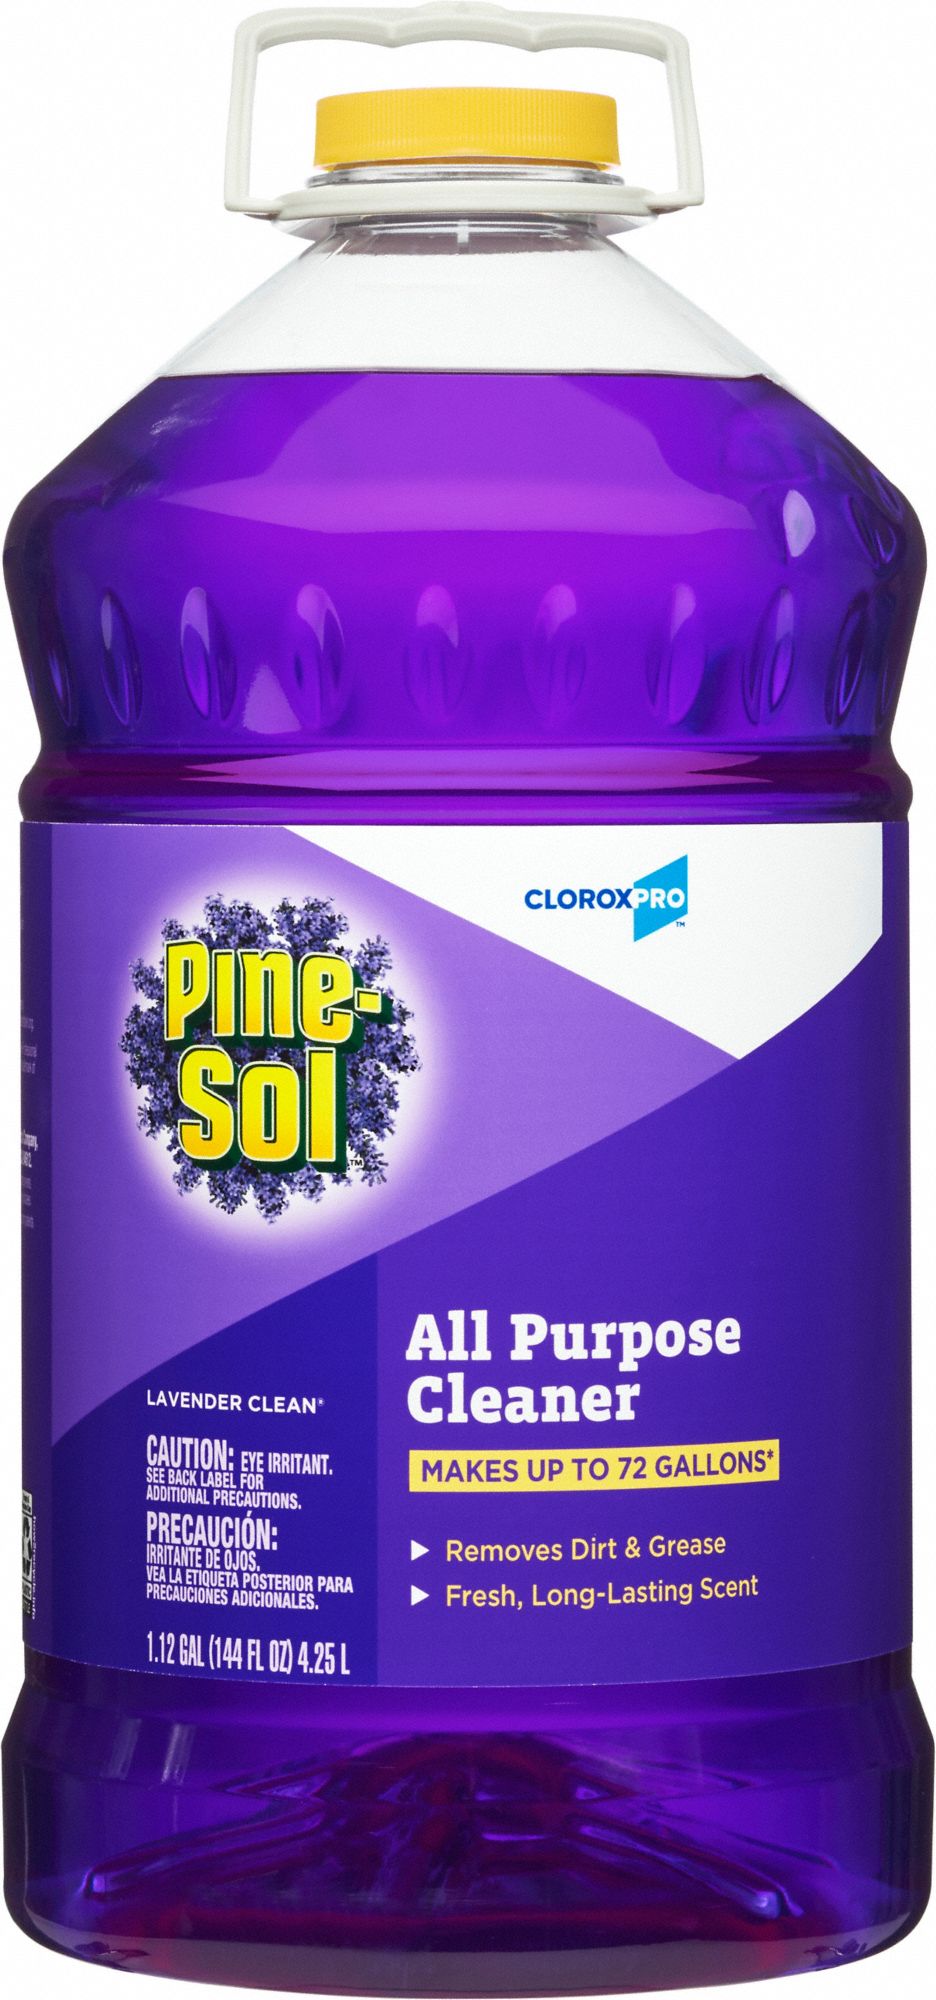 All Purpose Cleaner: Bottle, 144 oz Container Size, Ready to Use, Lavender, Alkaline, 3 PK